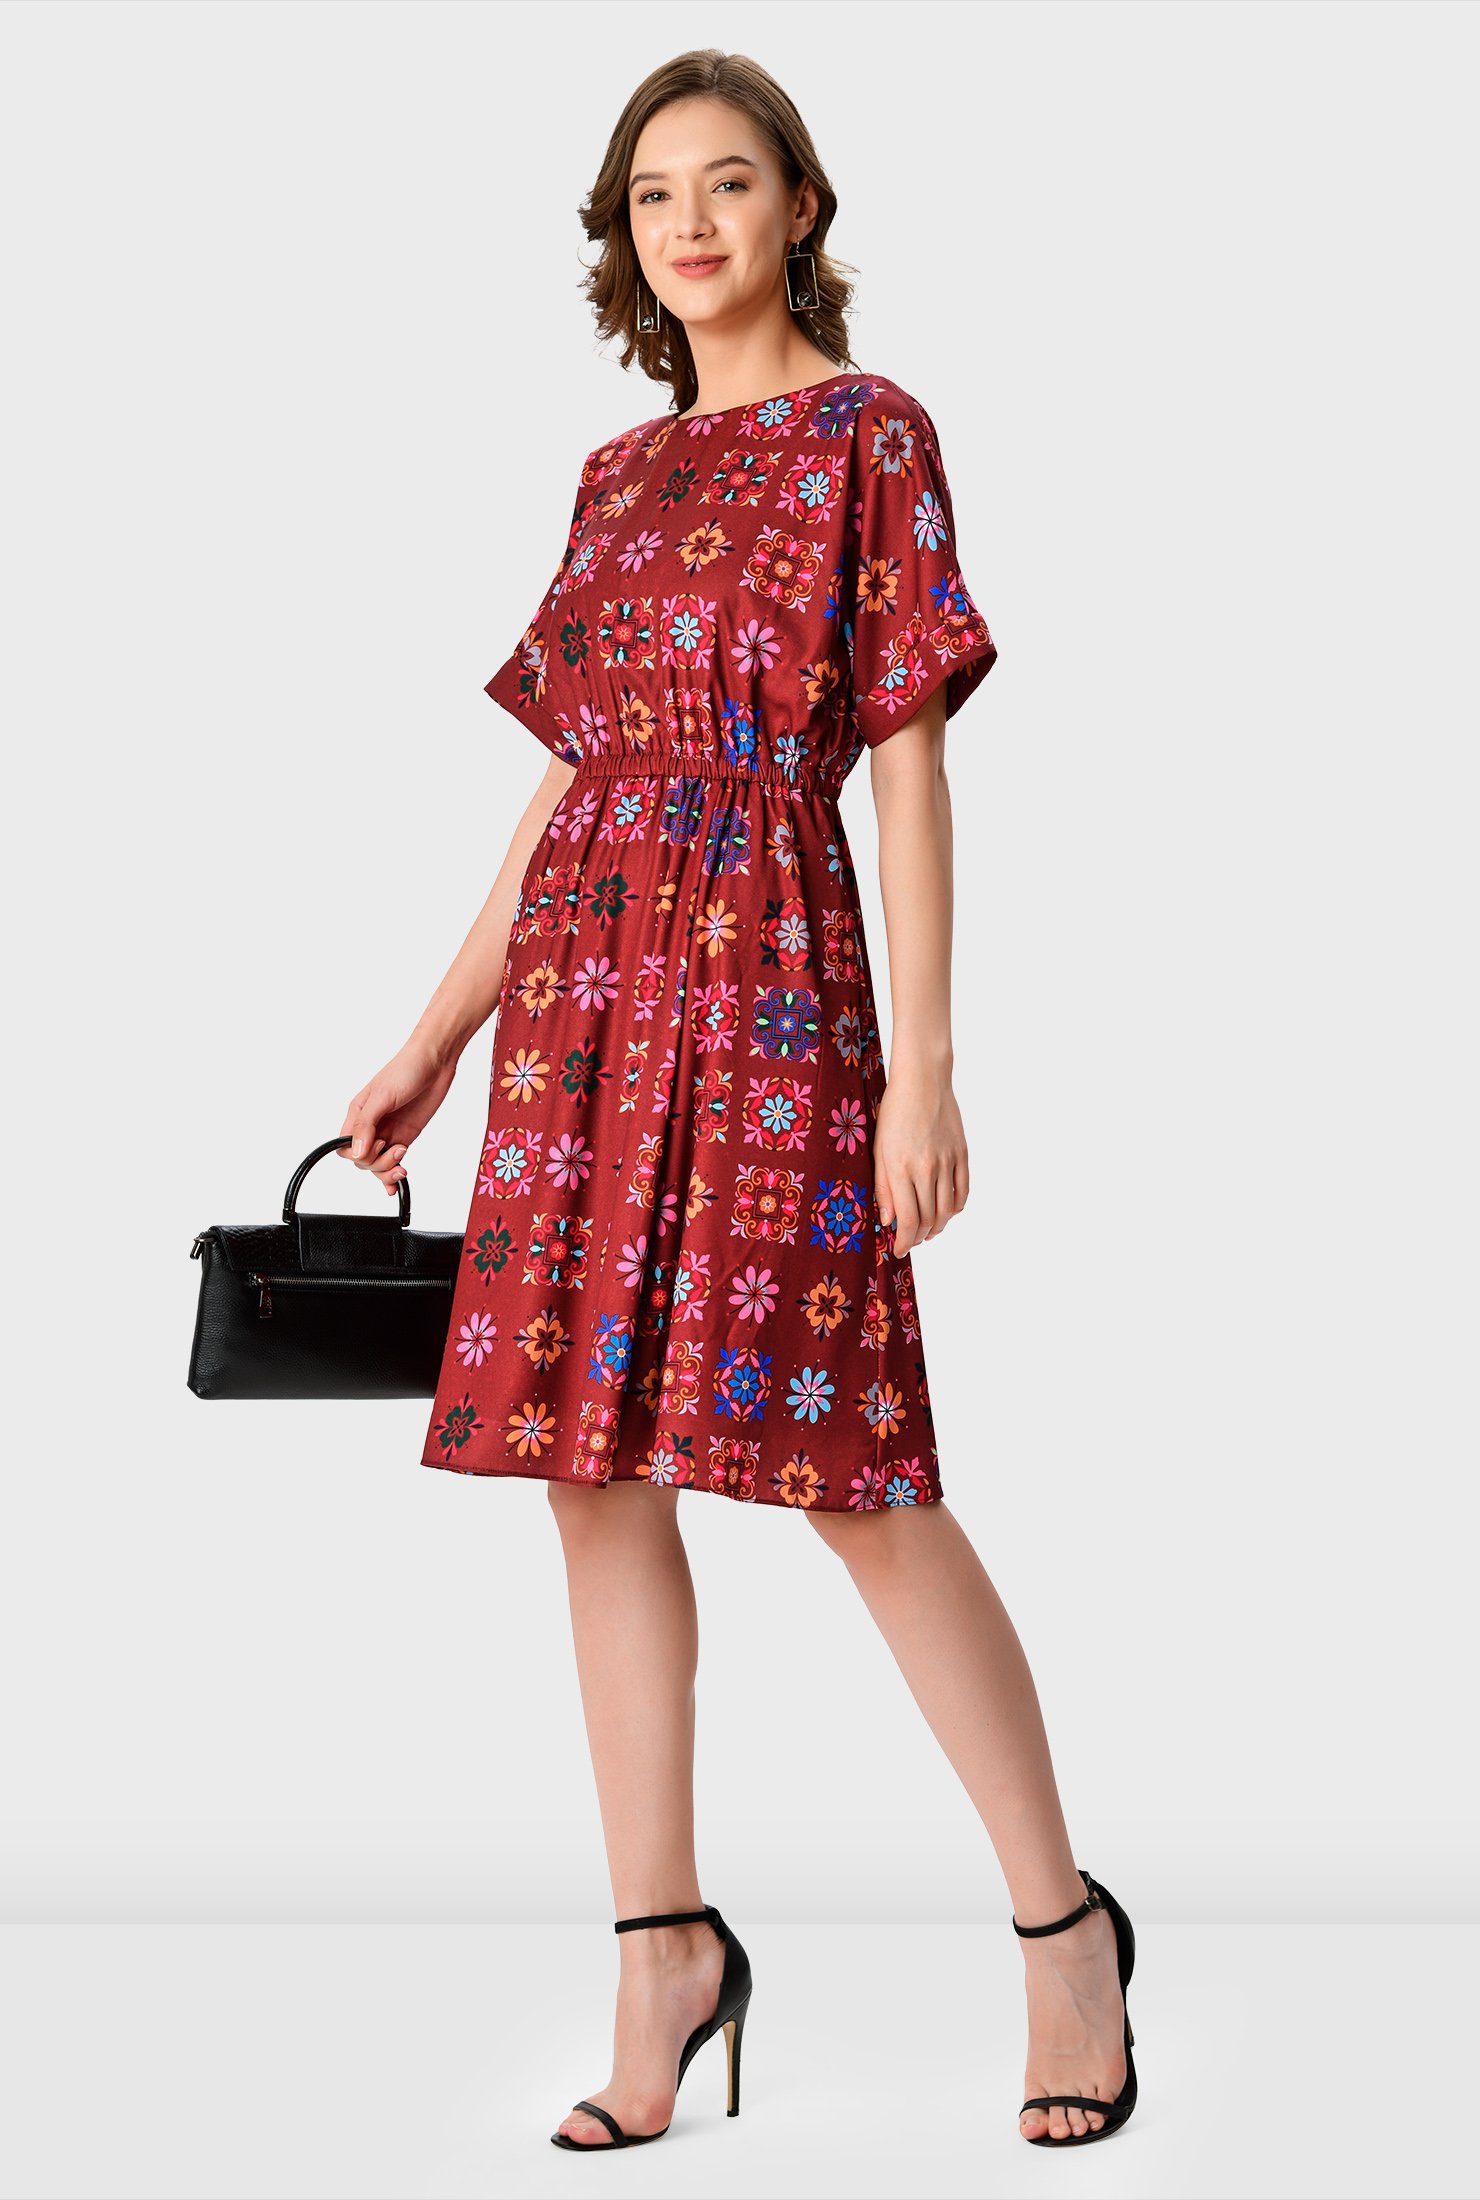 Let the colors pop! Our versatile dress to see you through the season in colorful floral print crepe is styled with easy dolman sleeves and cinched in with an elastic waist for a blousony fit.